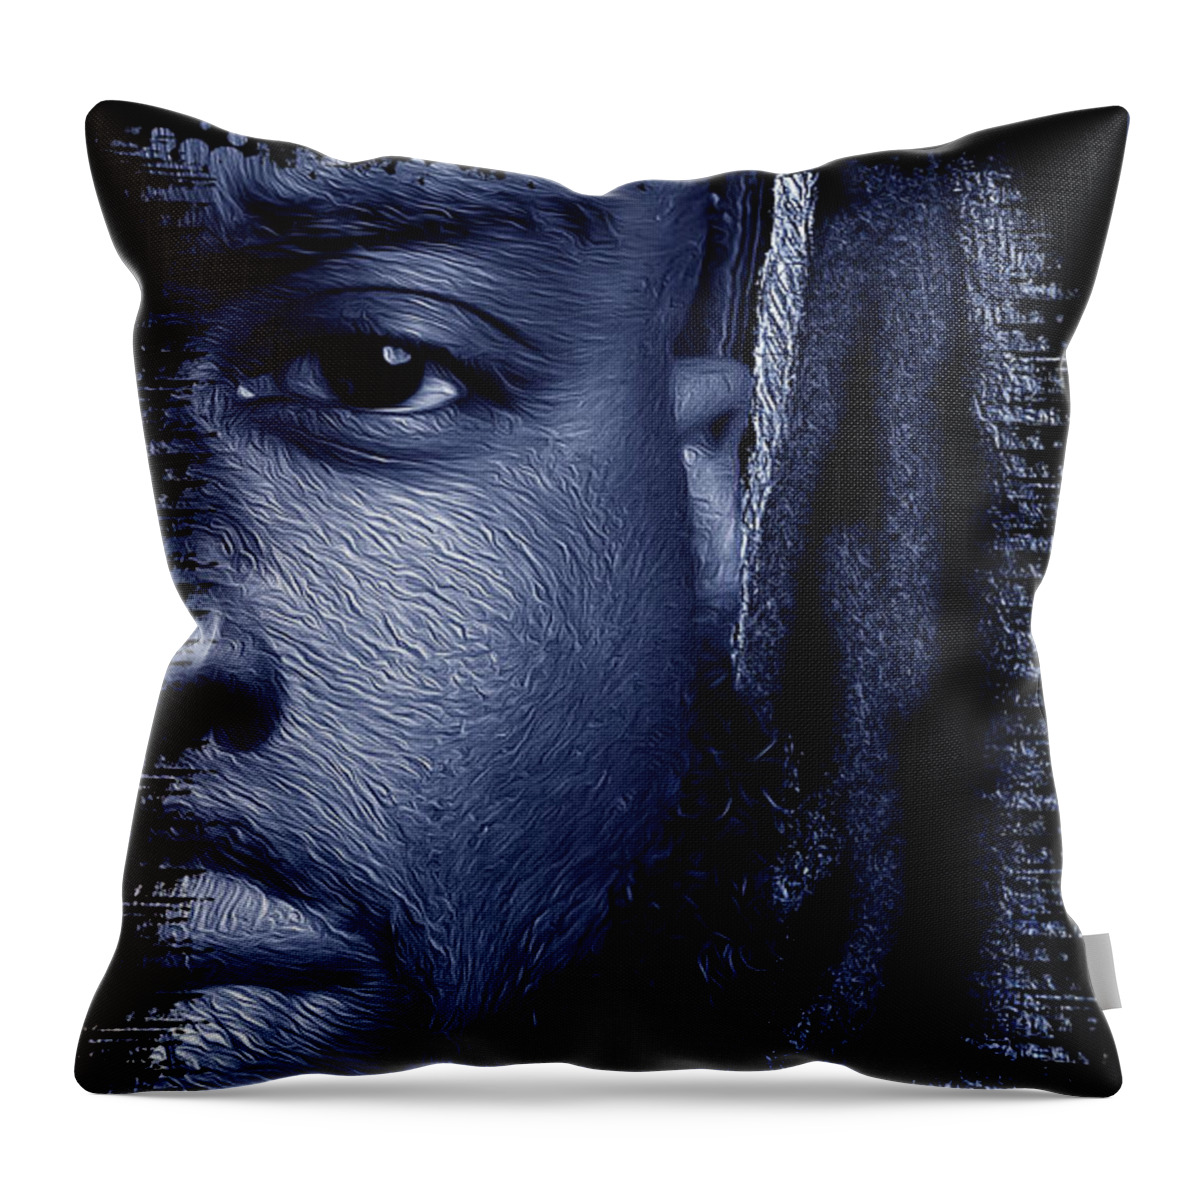 Shades Collection 2 Throw Pillow featuring the digital art Shades of Black 2 by Aldane Wynter